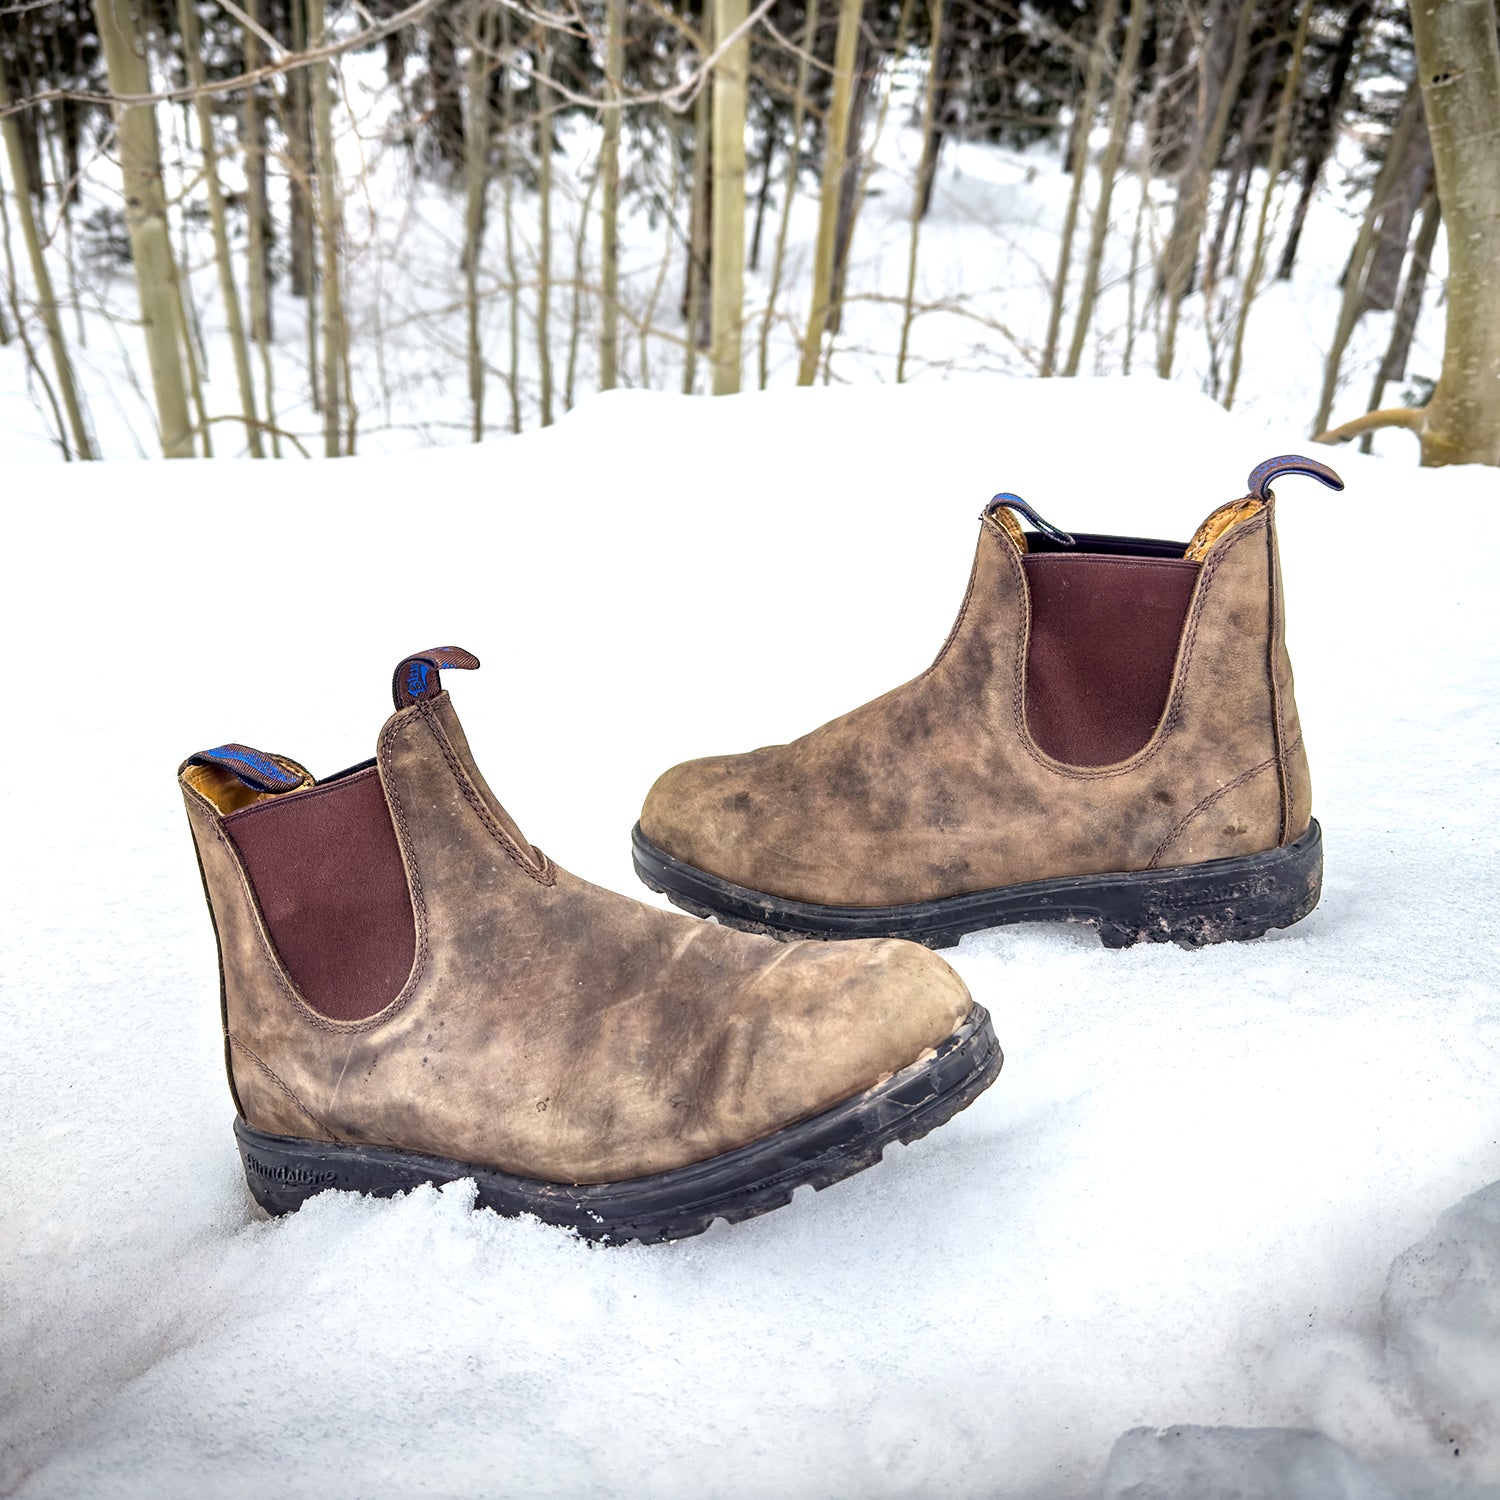 Why Insulated Blundstones Are the Only Winter Boots You Need